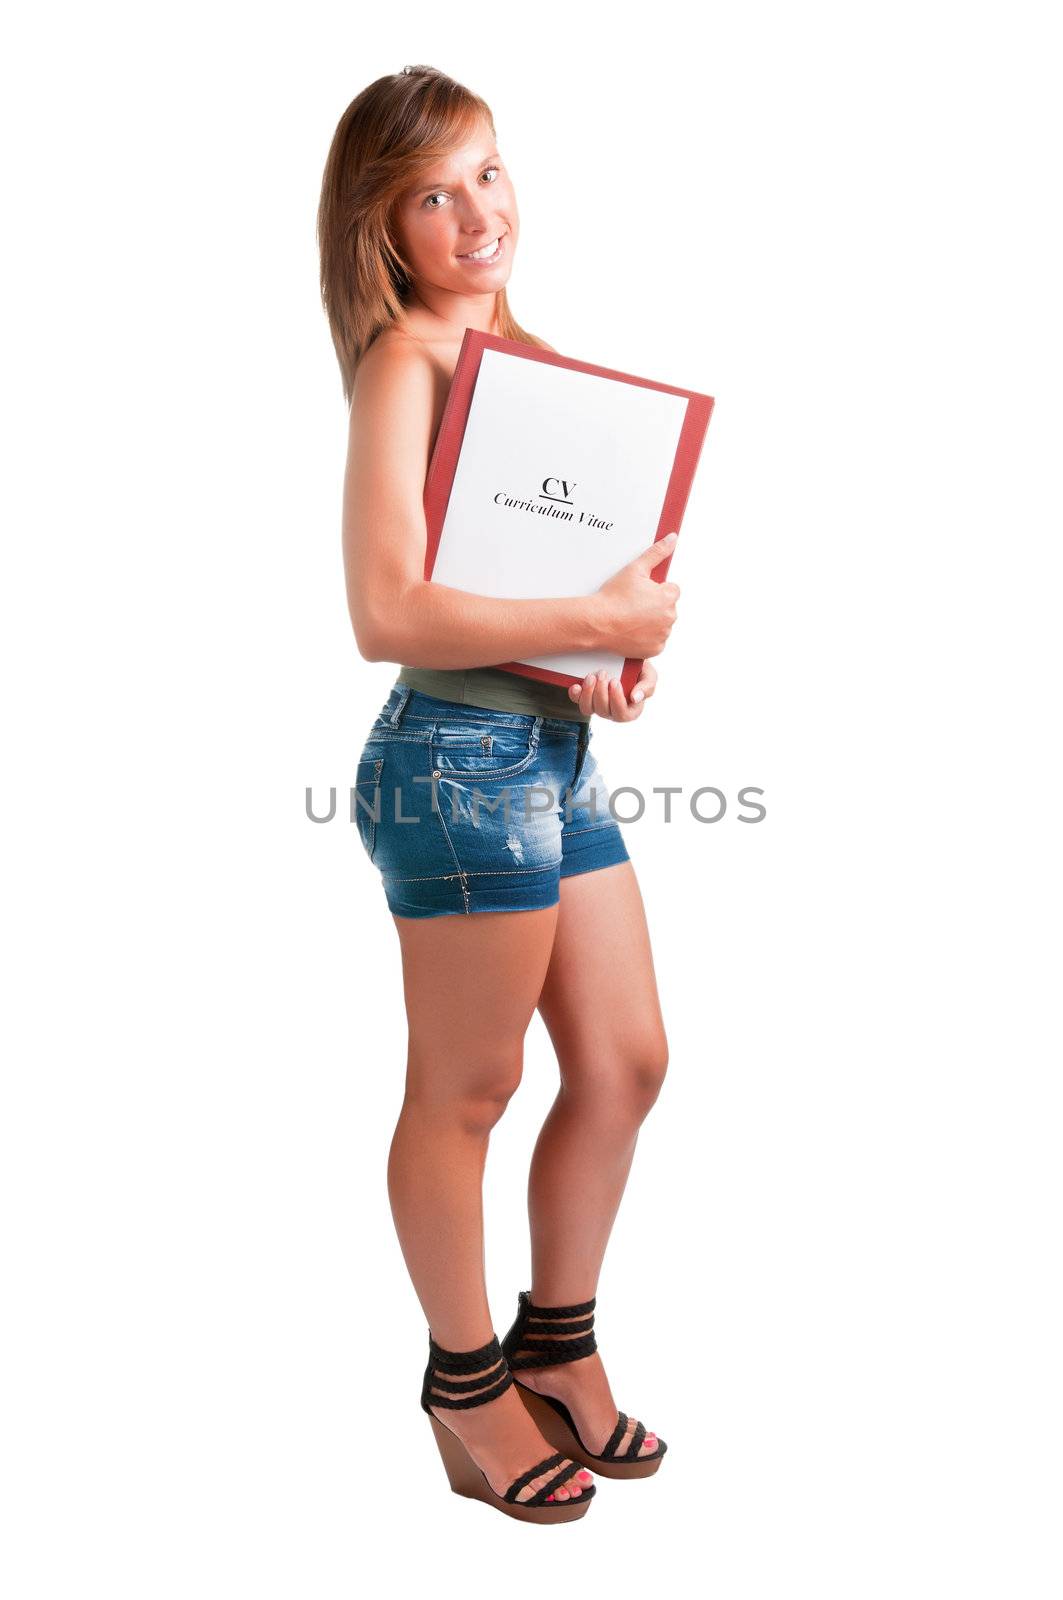 Young woman with a notepad and a curriculum vitae in her arms